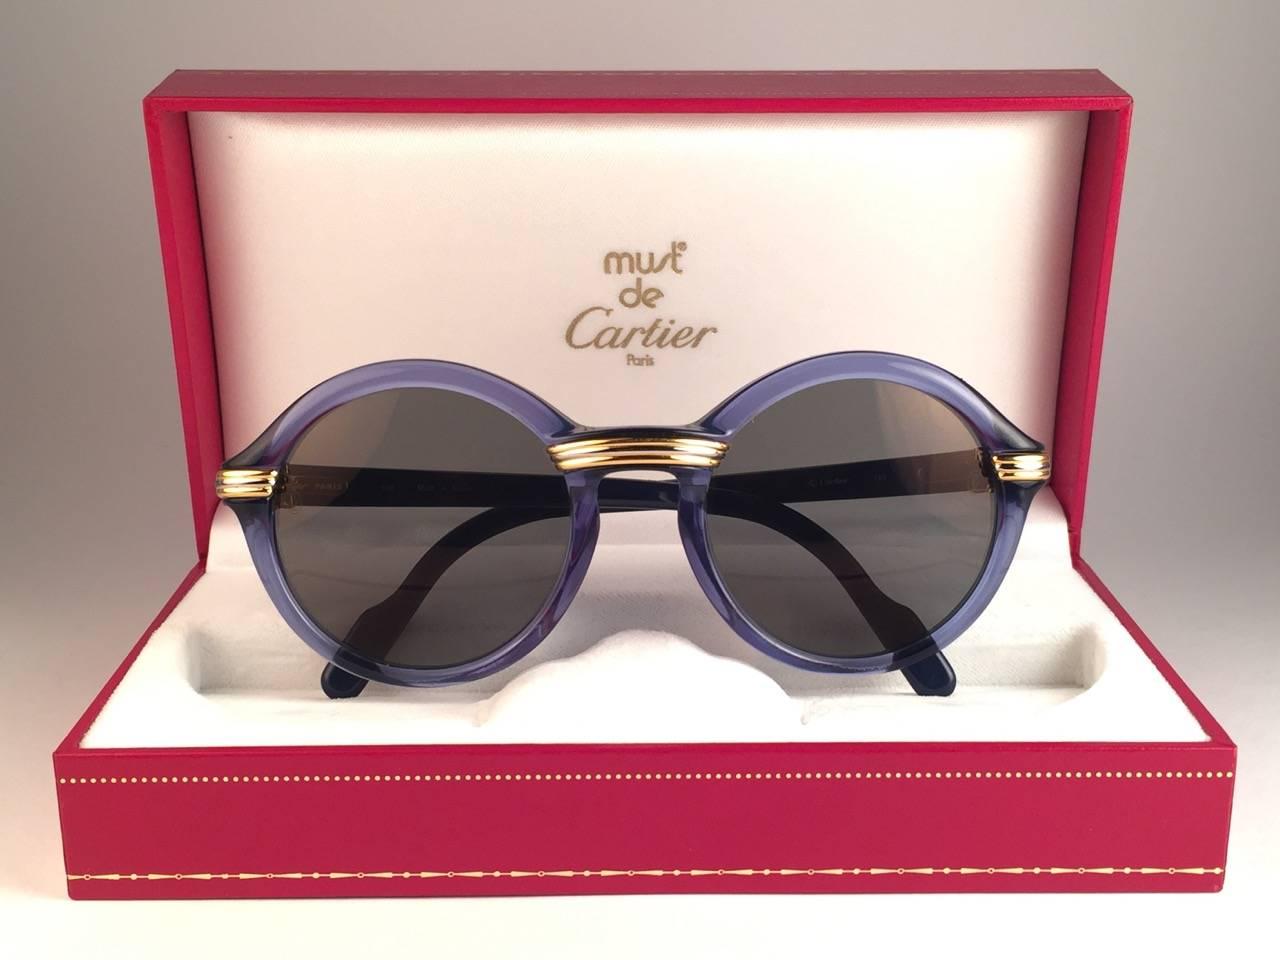 New 1991 Original Cartier Cabriolet Art Deco Translucent Blue sunglasses with Original Cartier G15 Slight Gold Mirror ( uv protection ) lenses.
Frame has the famous real gold and white gold accents in the middle and on the sides. 
All hallmarks.